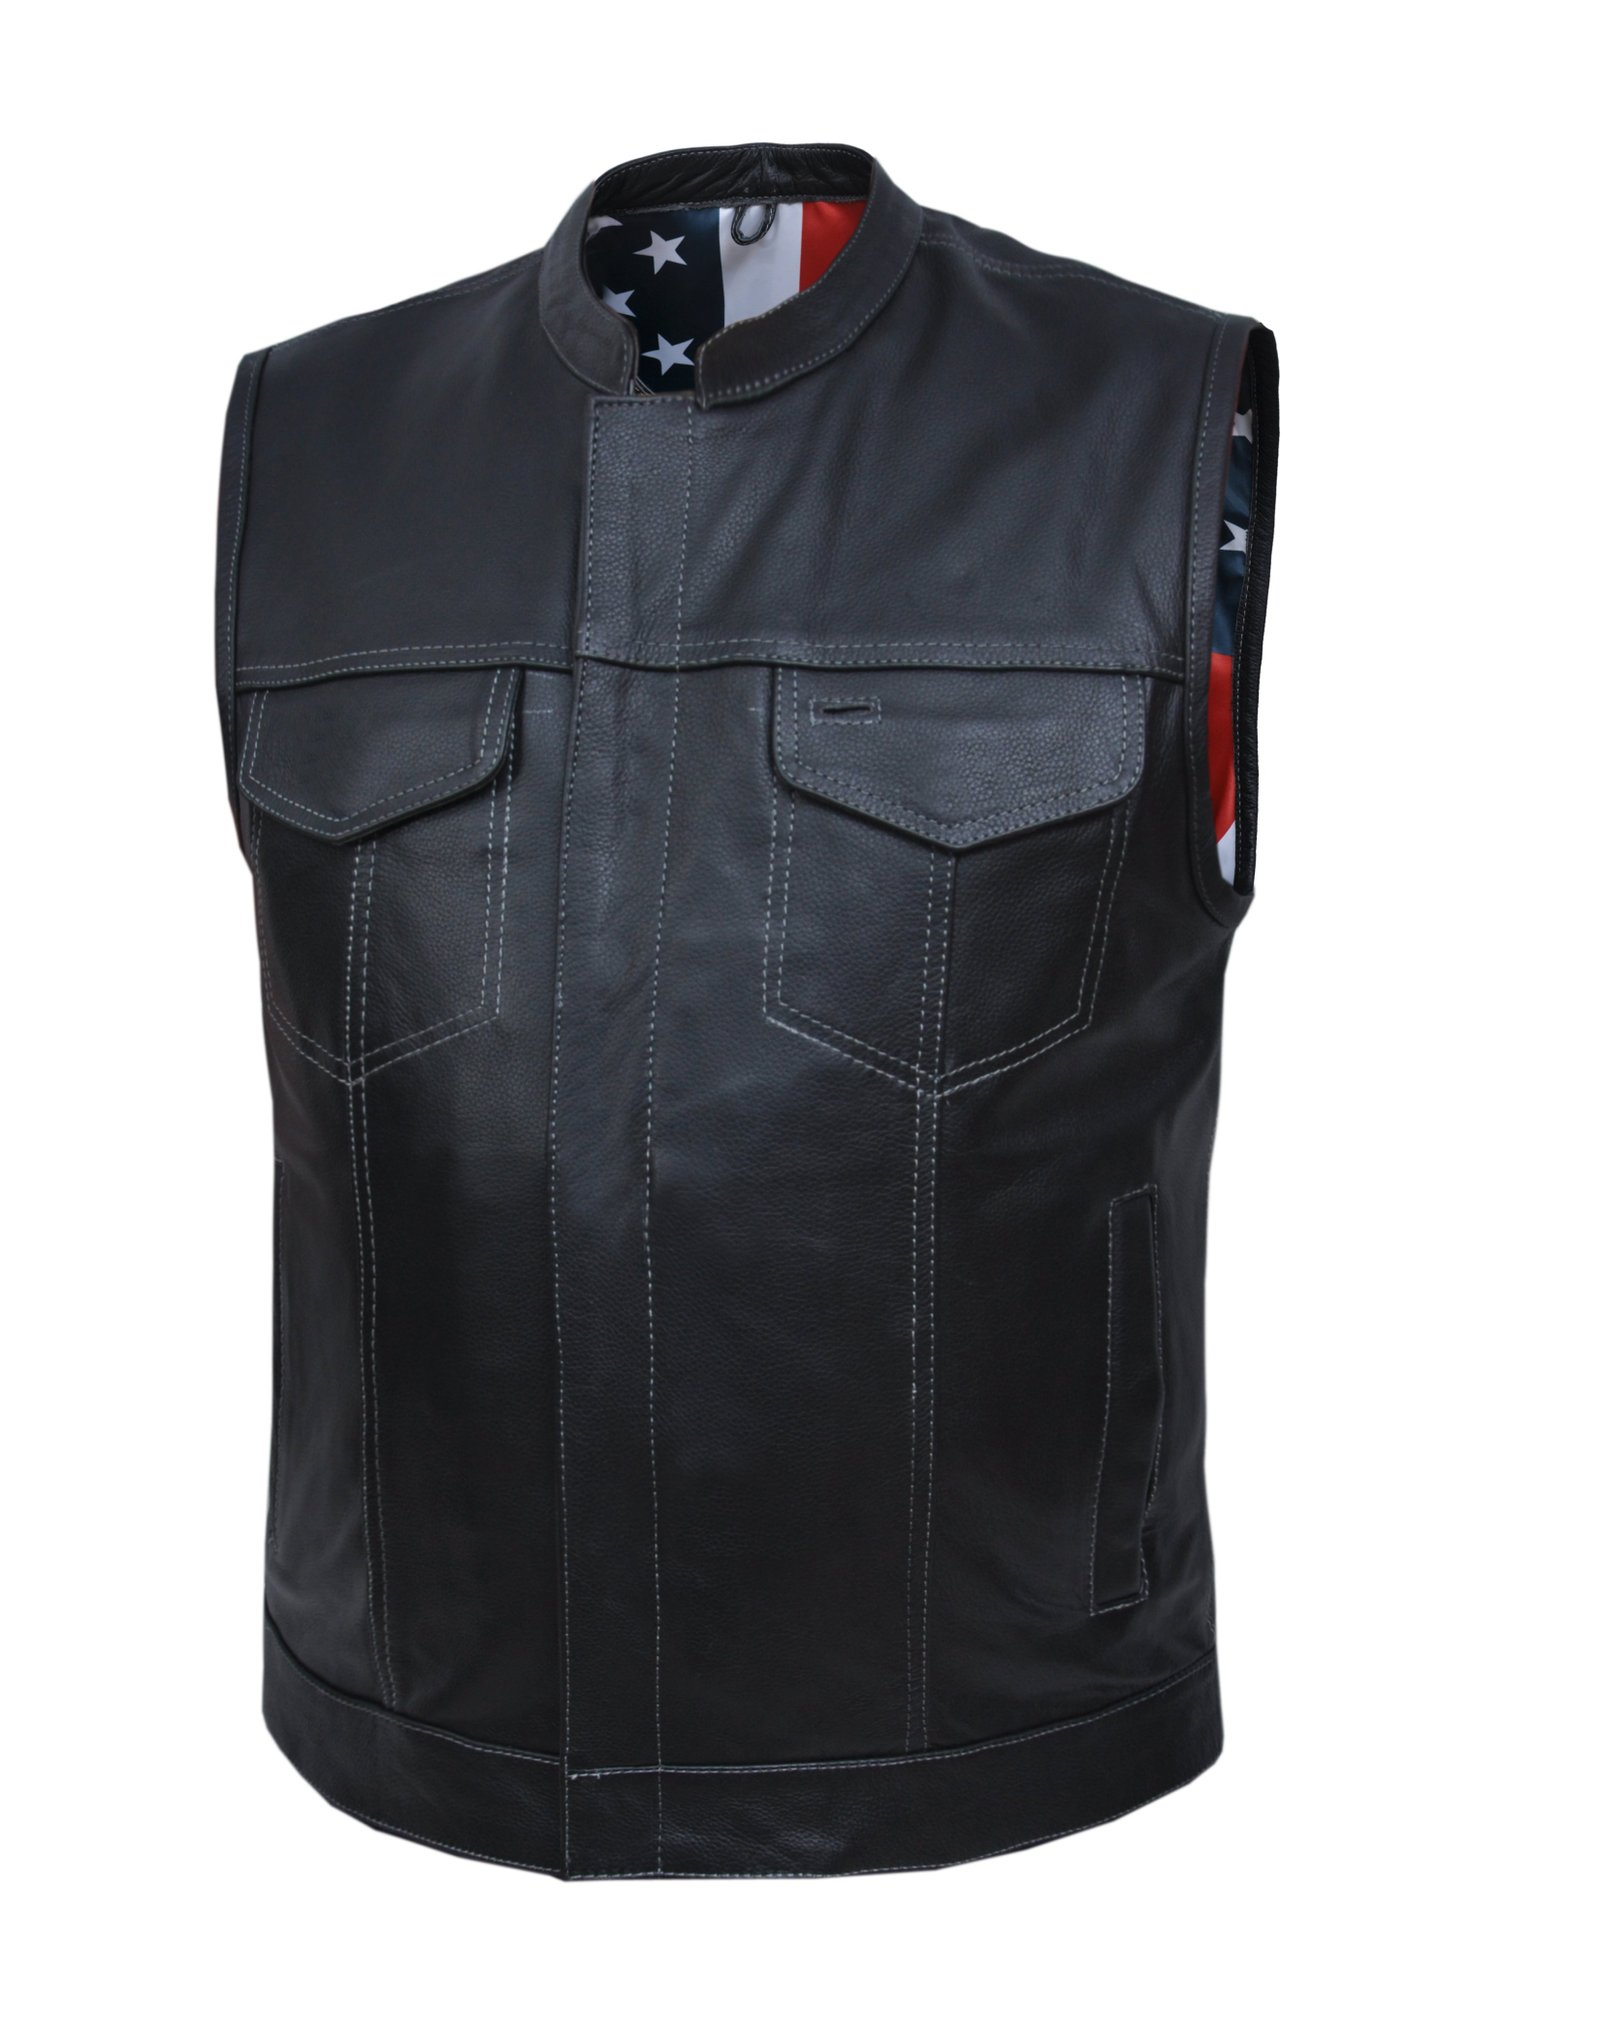 Men's Leather Vest with USA Flag Liner From Unik - SKU 6665-USA-UN